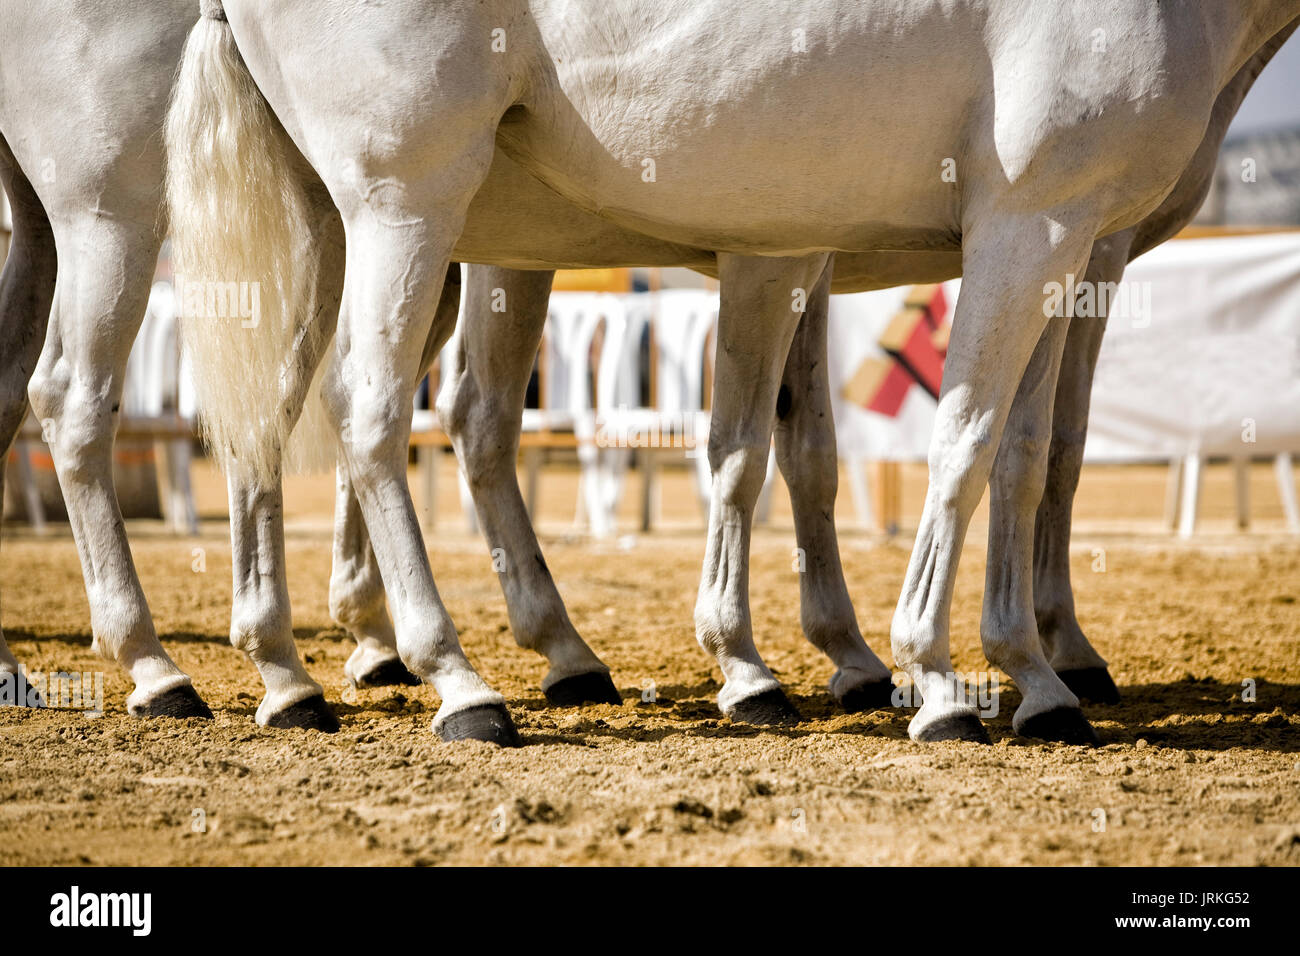 Equestrian test functionality with 3 pure Spanish horses, also called cobras 3 Mares, detail of the legs and hooves, Spain Stock Photo